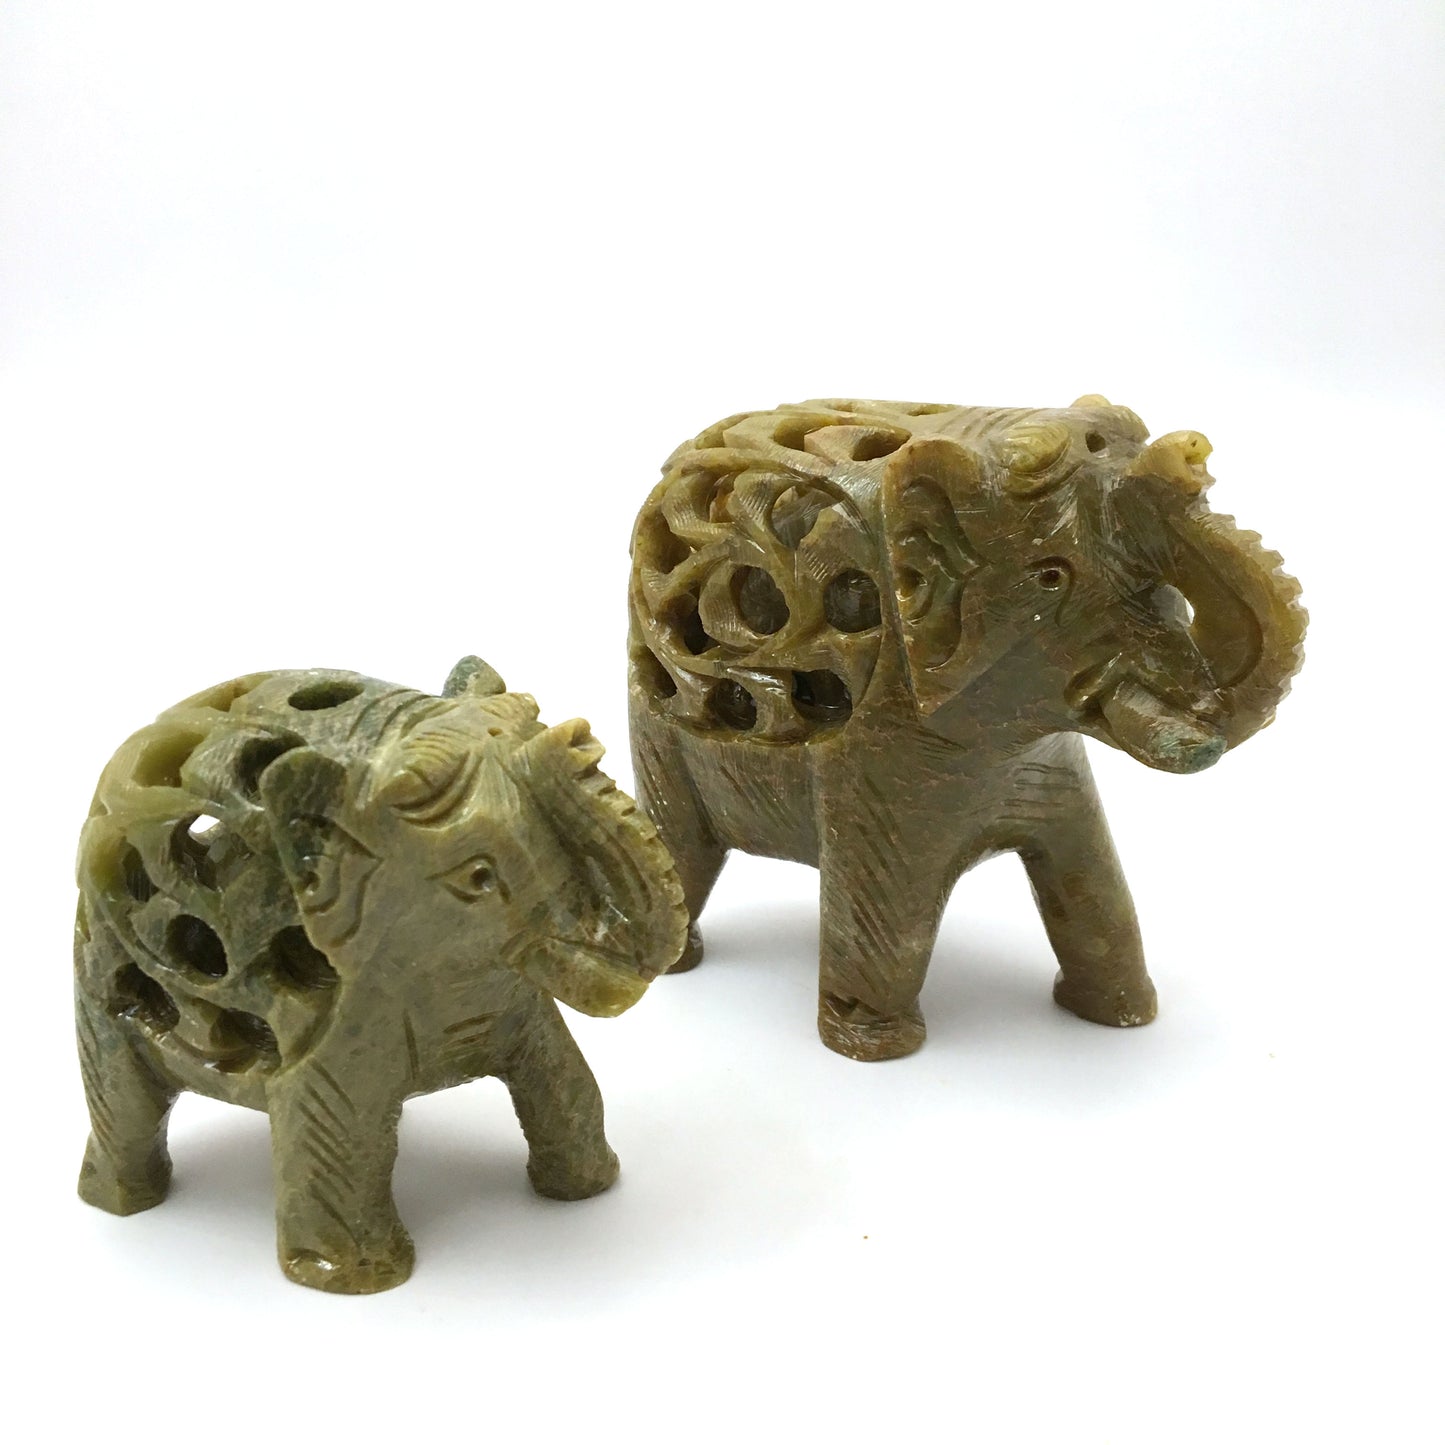 Pair Soapstone Elephants India Handcrafted with Inside Baby Elephant - Green